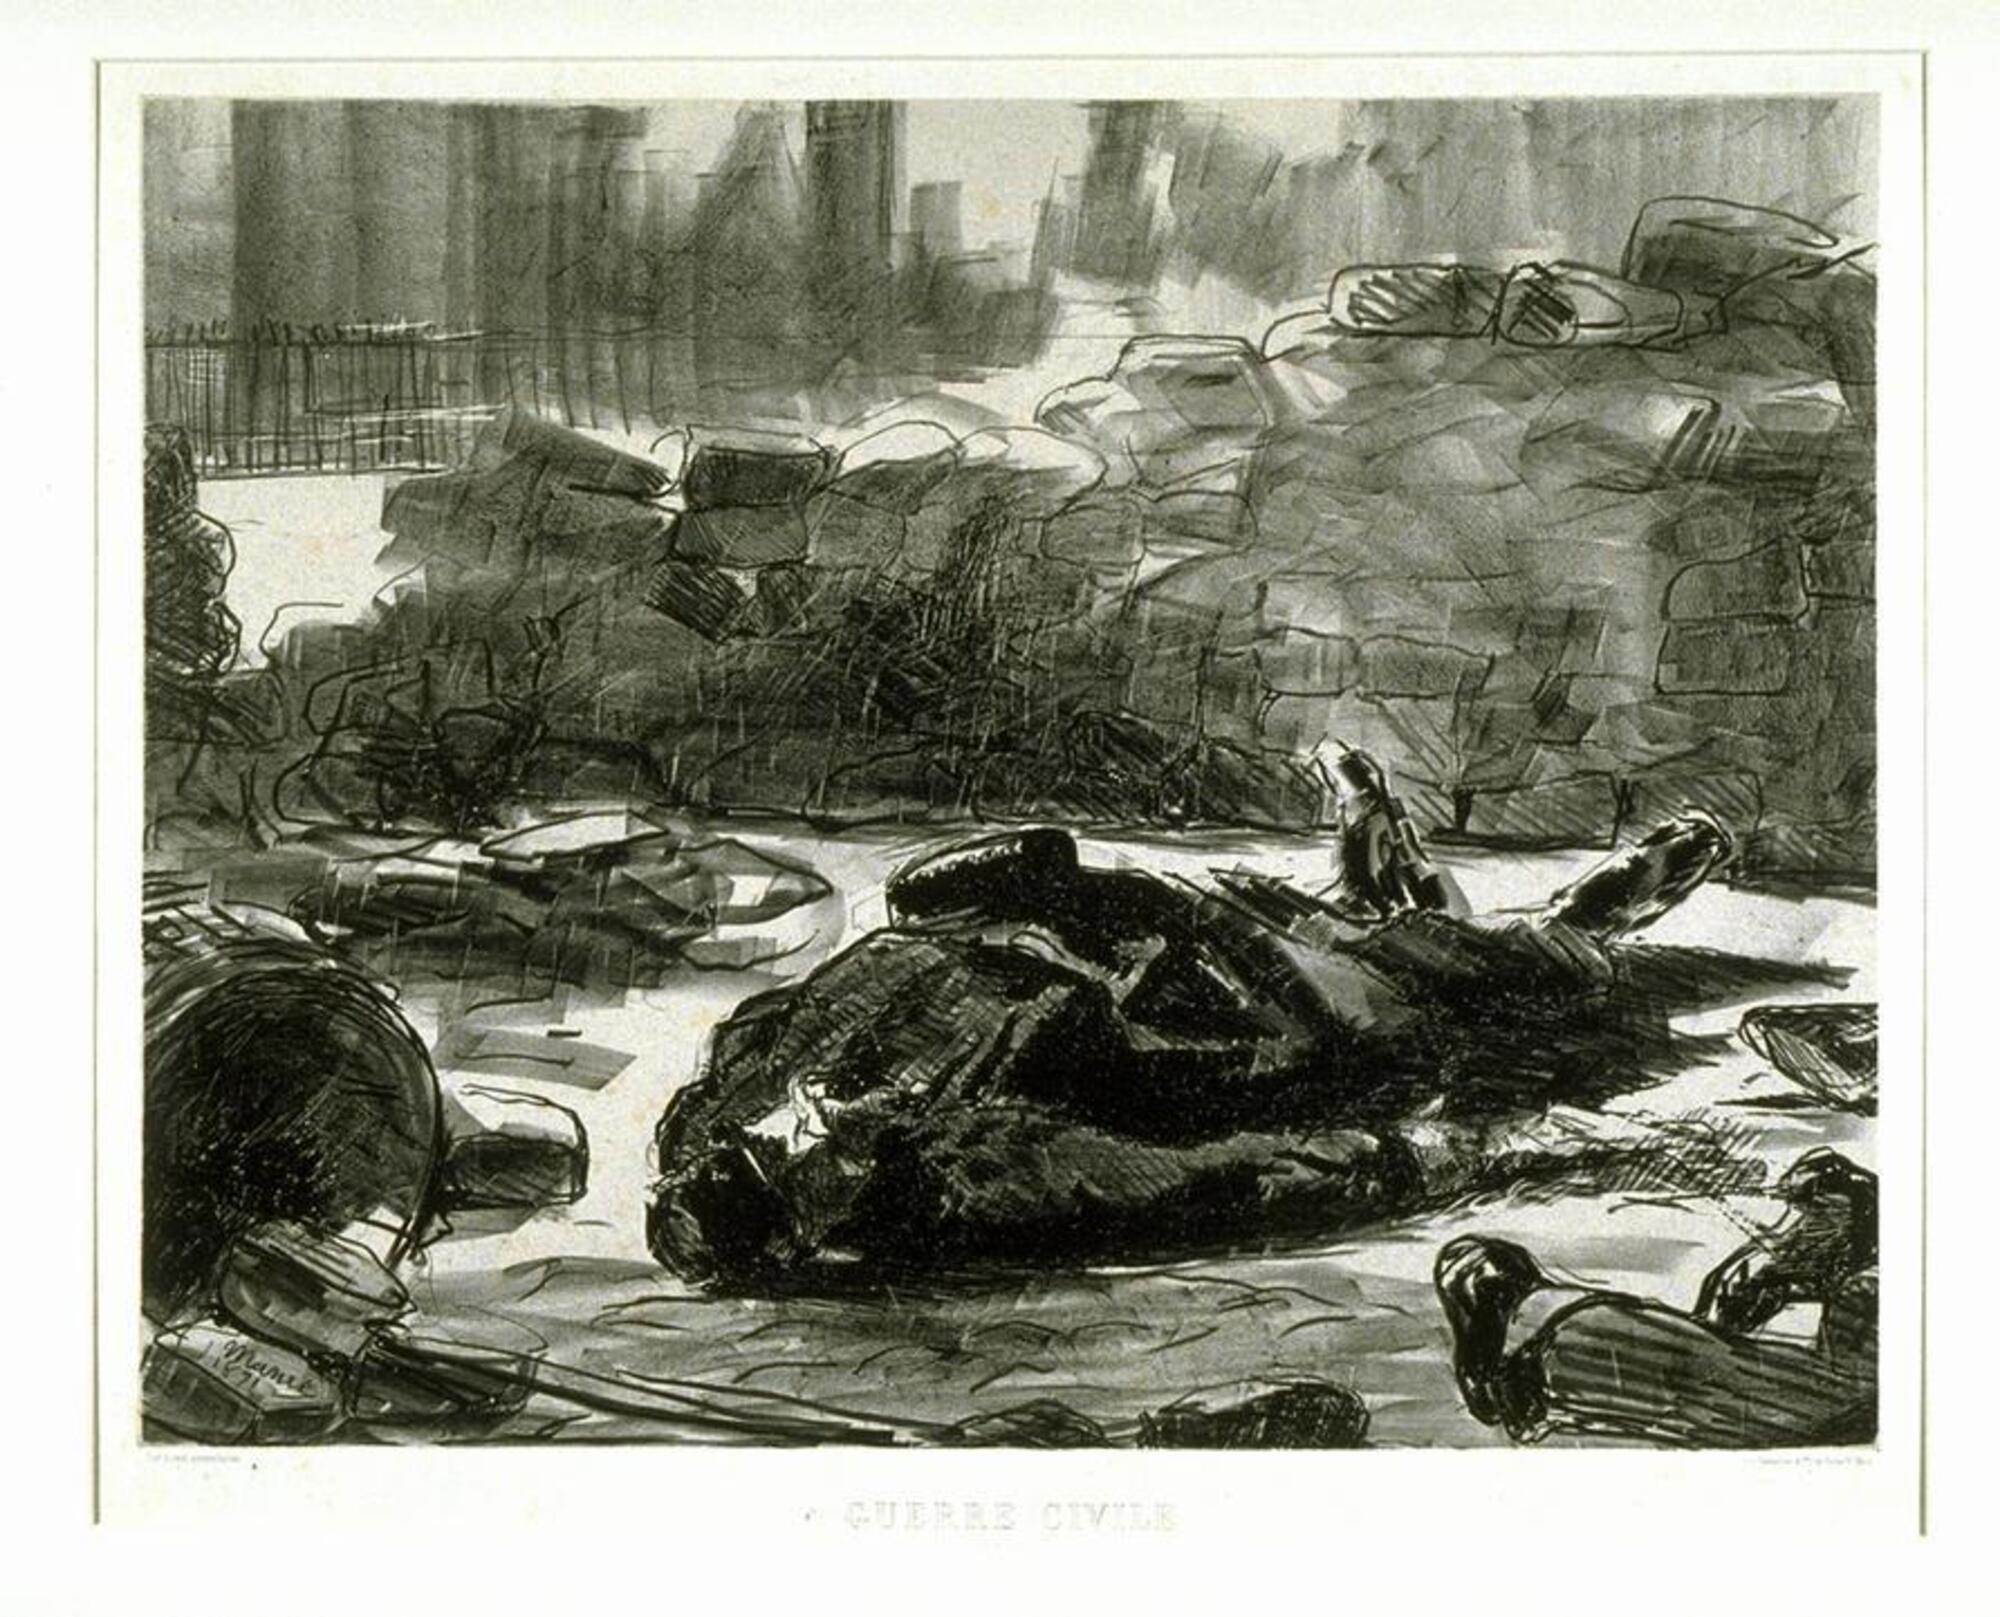 A man laying on his back dominates this landscape-oriented black-and-white lithograph. He is fully dressed. Positioned diagonally across the foreground and depicted using dramatic foreshortening, his face is near the viewer (a mustache is visible, and he wears a hat reminiscent of a kepi, or military hat), while his stiff upturned feet lead the eye towards the ramshackle wall of paving stones that cuts horizontally across the top third of the composition. A pair of feet peeking out of striped trousers jut into the lower right foreground, while stones and possibly a wheel fill the left foreground. Hazy fences and buildings rise in the background empty stretches of street.<br /><br />
The work is signed on the stone (on one of the piled-up paving stones) in the front left foreground: “Manet / 1871”.<br /><br />
Title printed in typeface below the image: "GUERRE CIVILE"